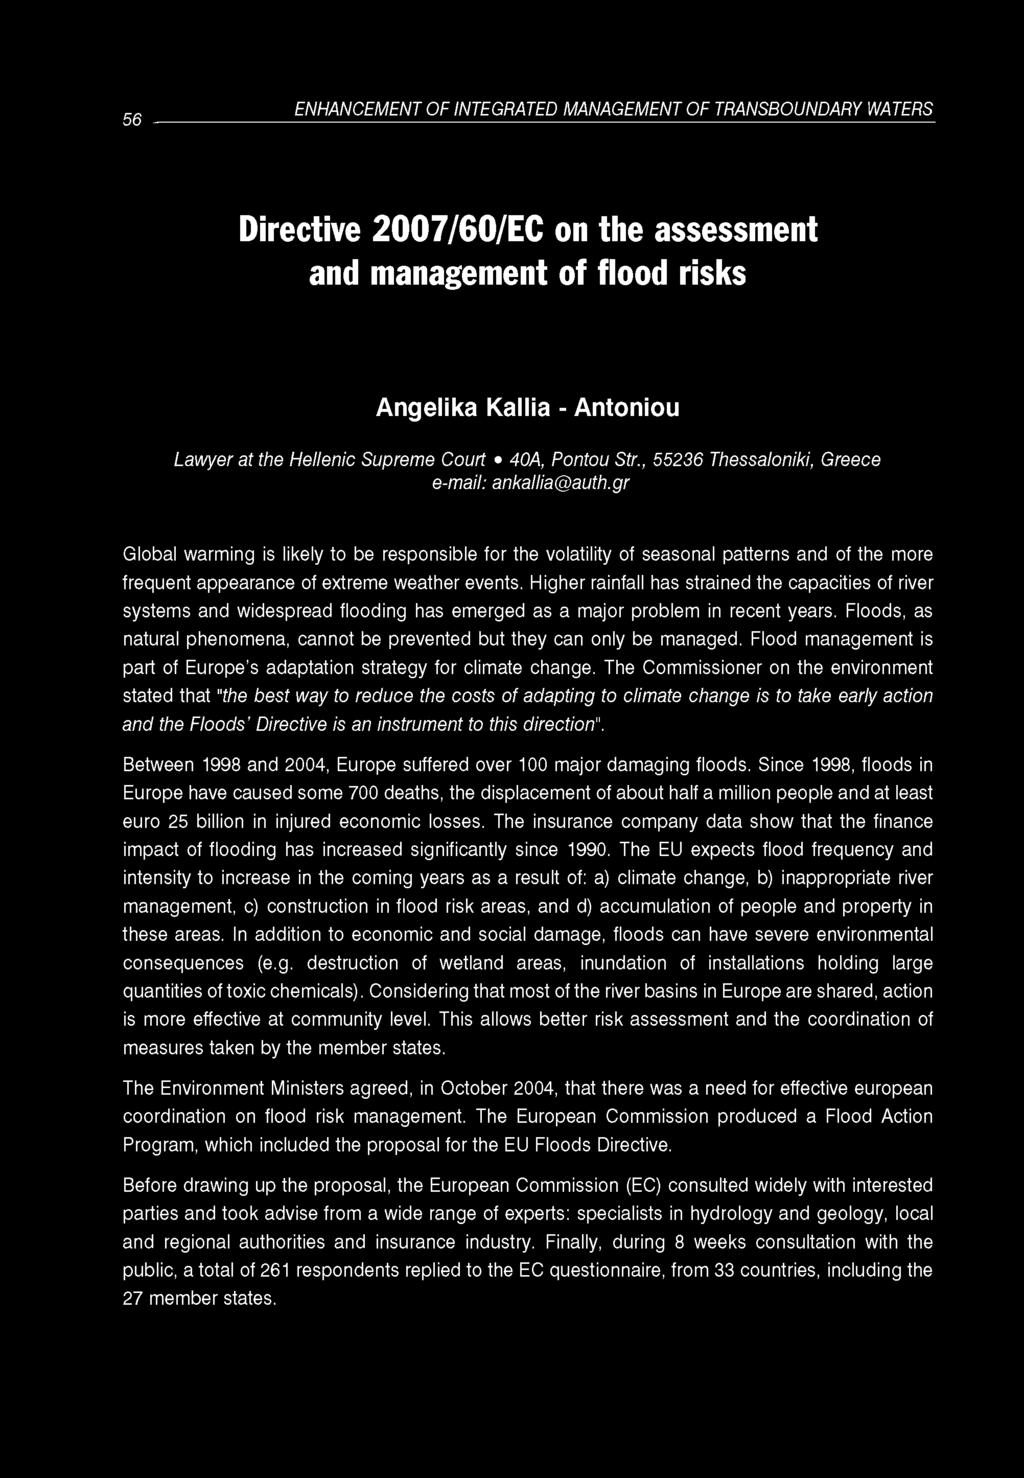 56 ENHANCEMENT OF INTEGRATED MANAGEMENT OF TRANSBOUNDARY WATERS Directive 2007/60/EC on the assessment and management of flood risks Angelika Kallia - Antoniou Lawyer at the Hellenic Supreme Court